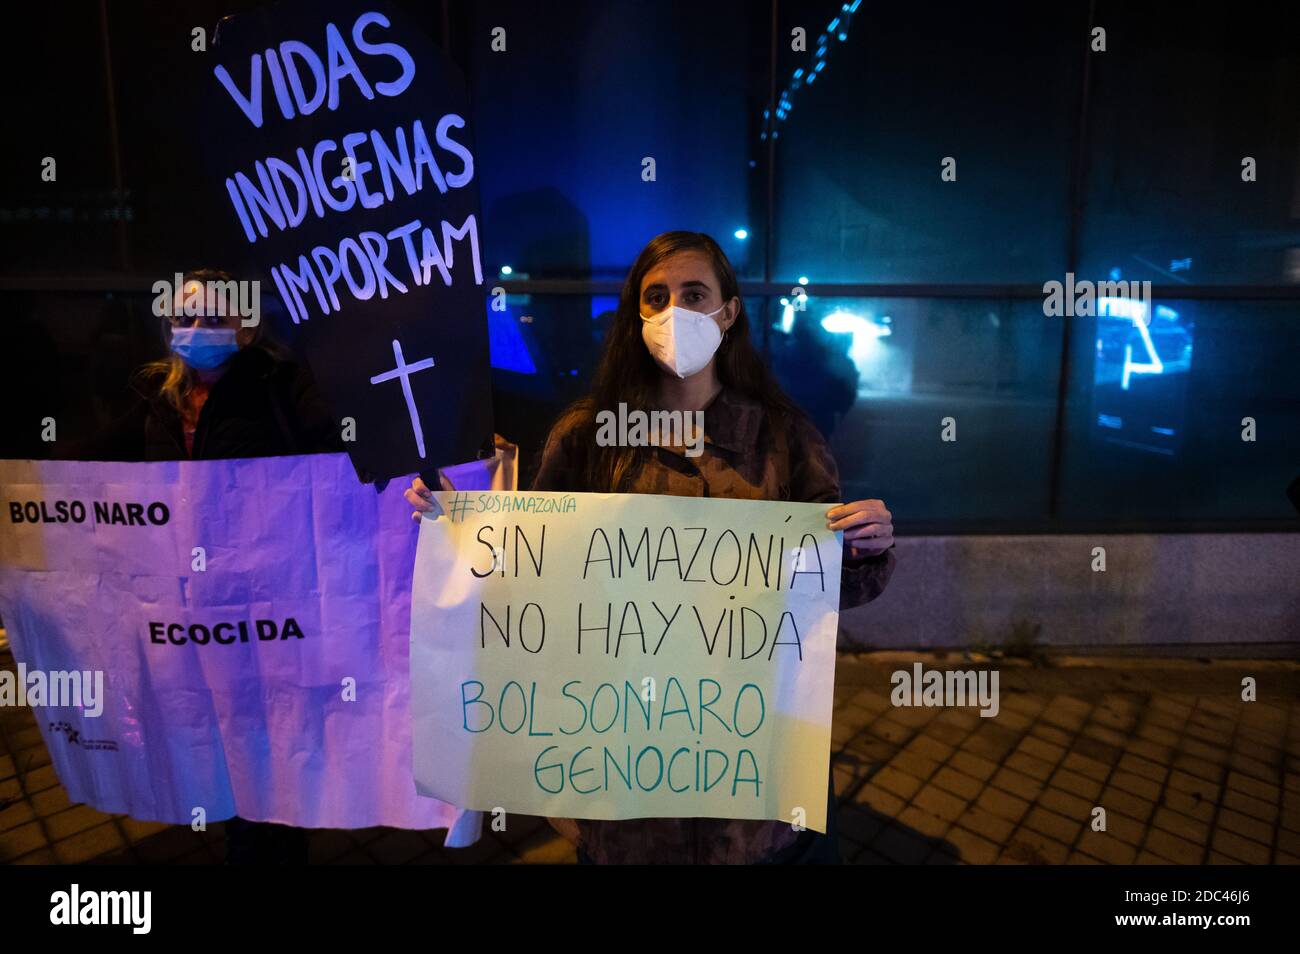 Madrid, Spain. 18th Nov, 2020. People protesting with placards against President of Brazil J. Bolsonaro and EU - Mercosur Trade agreement, calling for a stop to the violation of human rights and the destruction of nature. Credit: Marcos del Mazo/Alamy Live News Stock Photo